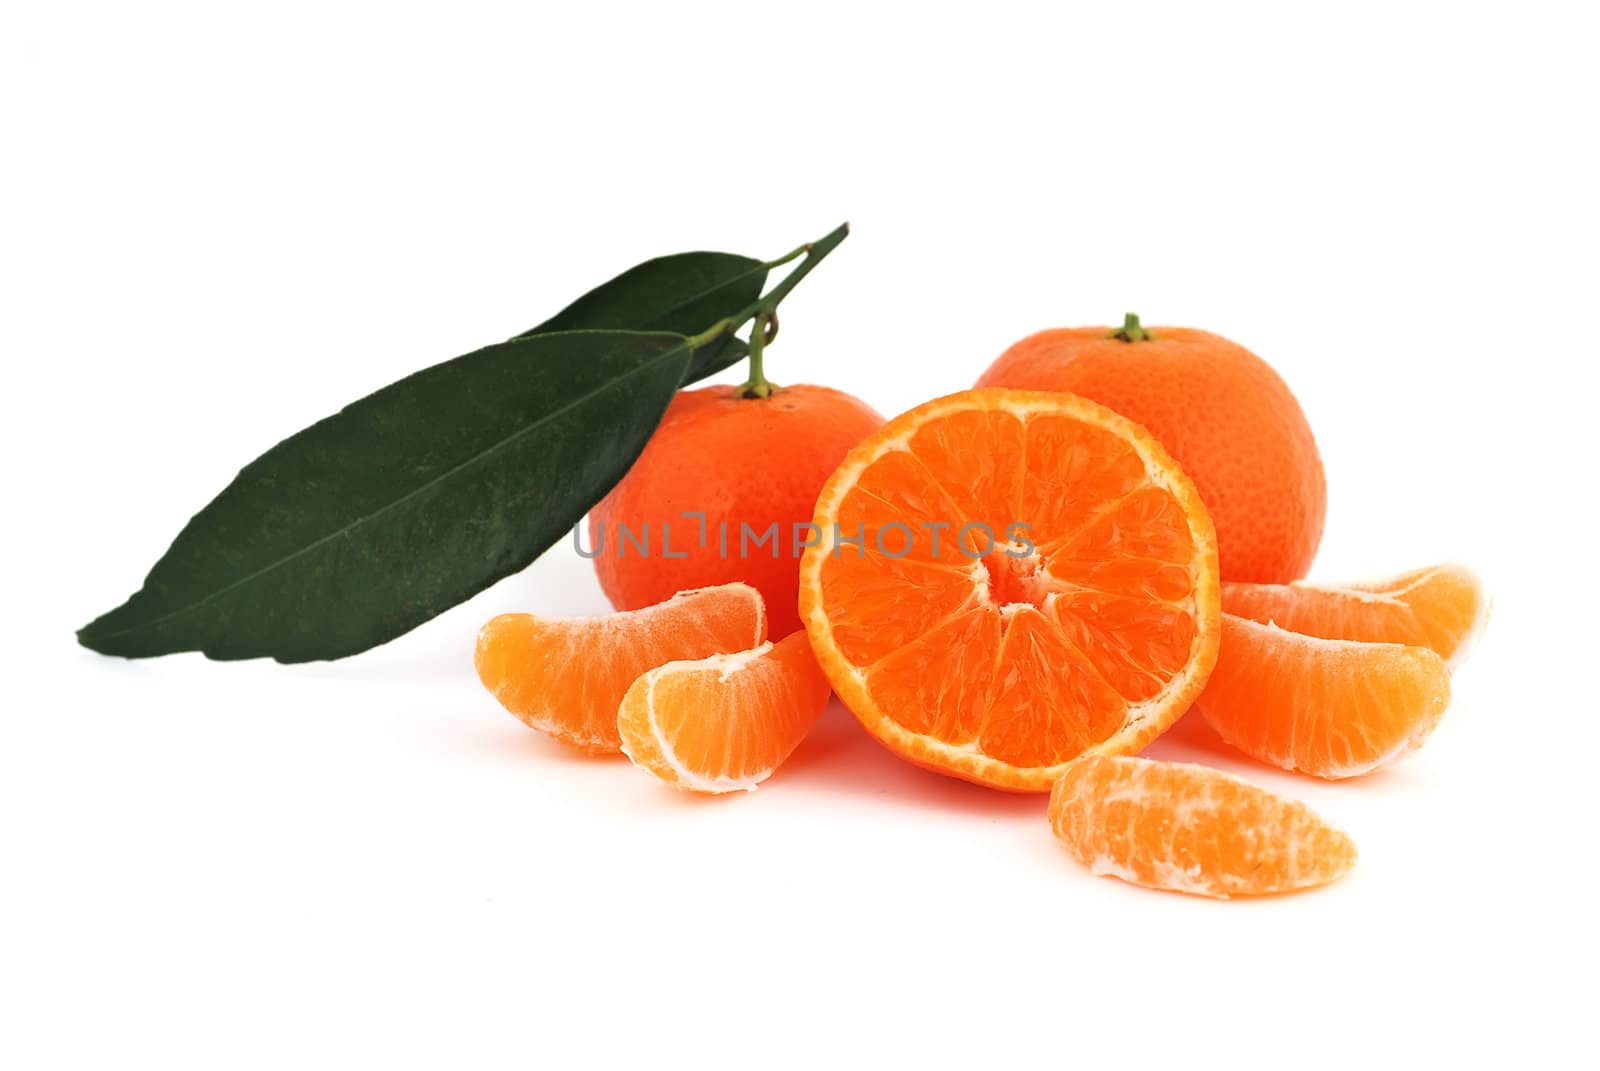 tangerines with leaves on white background